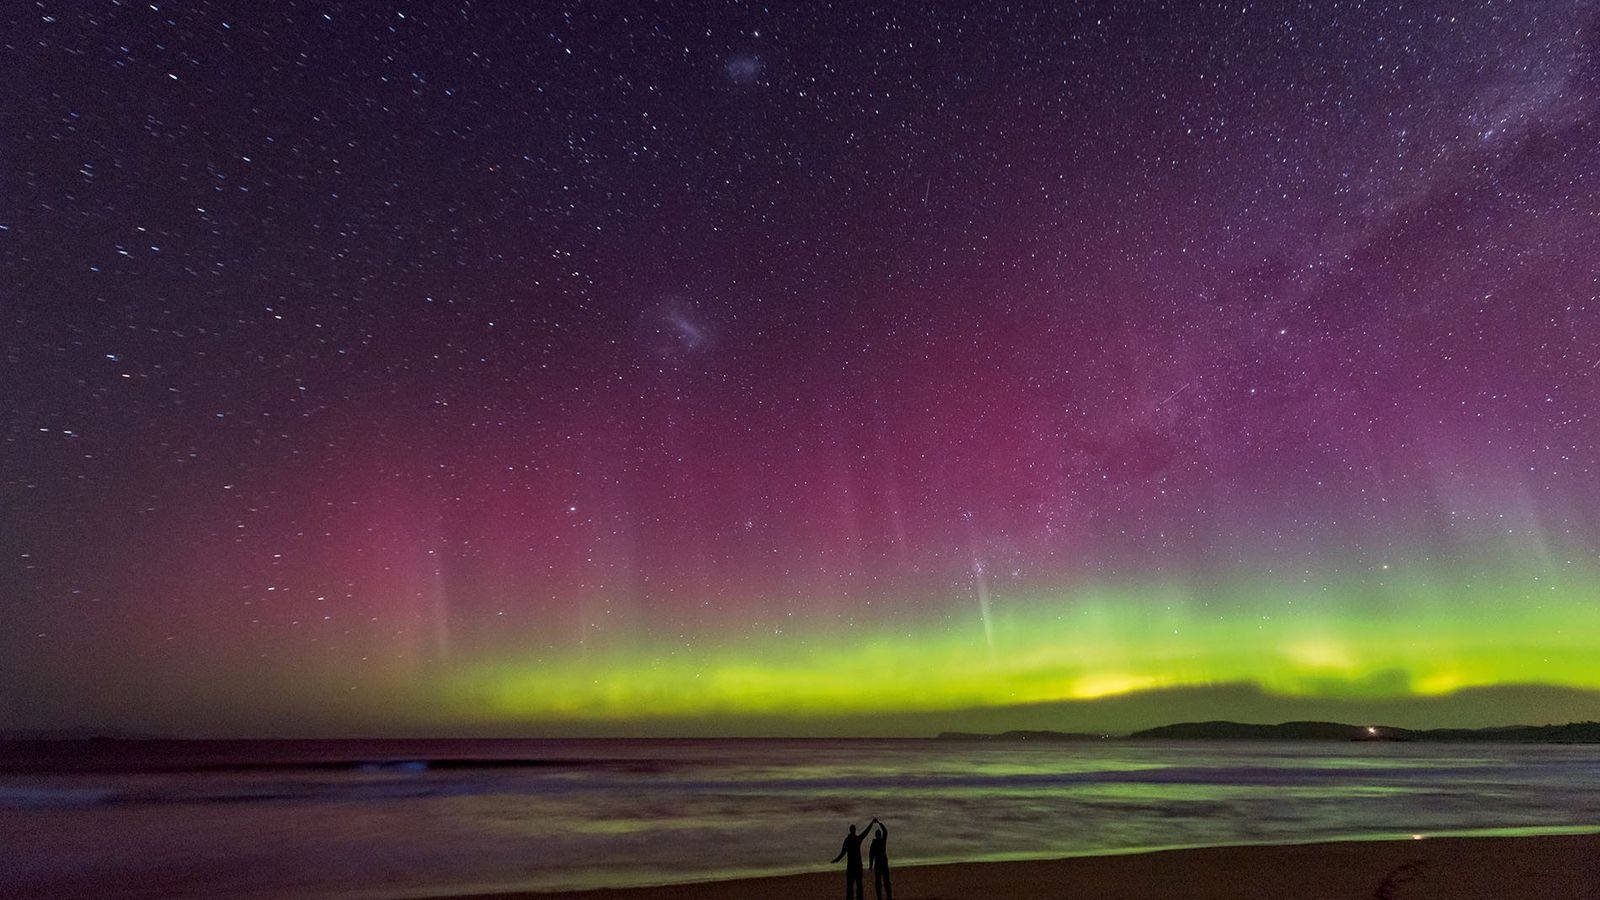 Electric dreams: when and where to see the Southern Lights